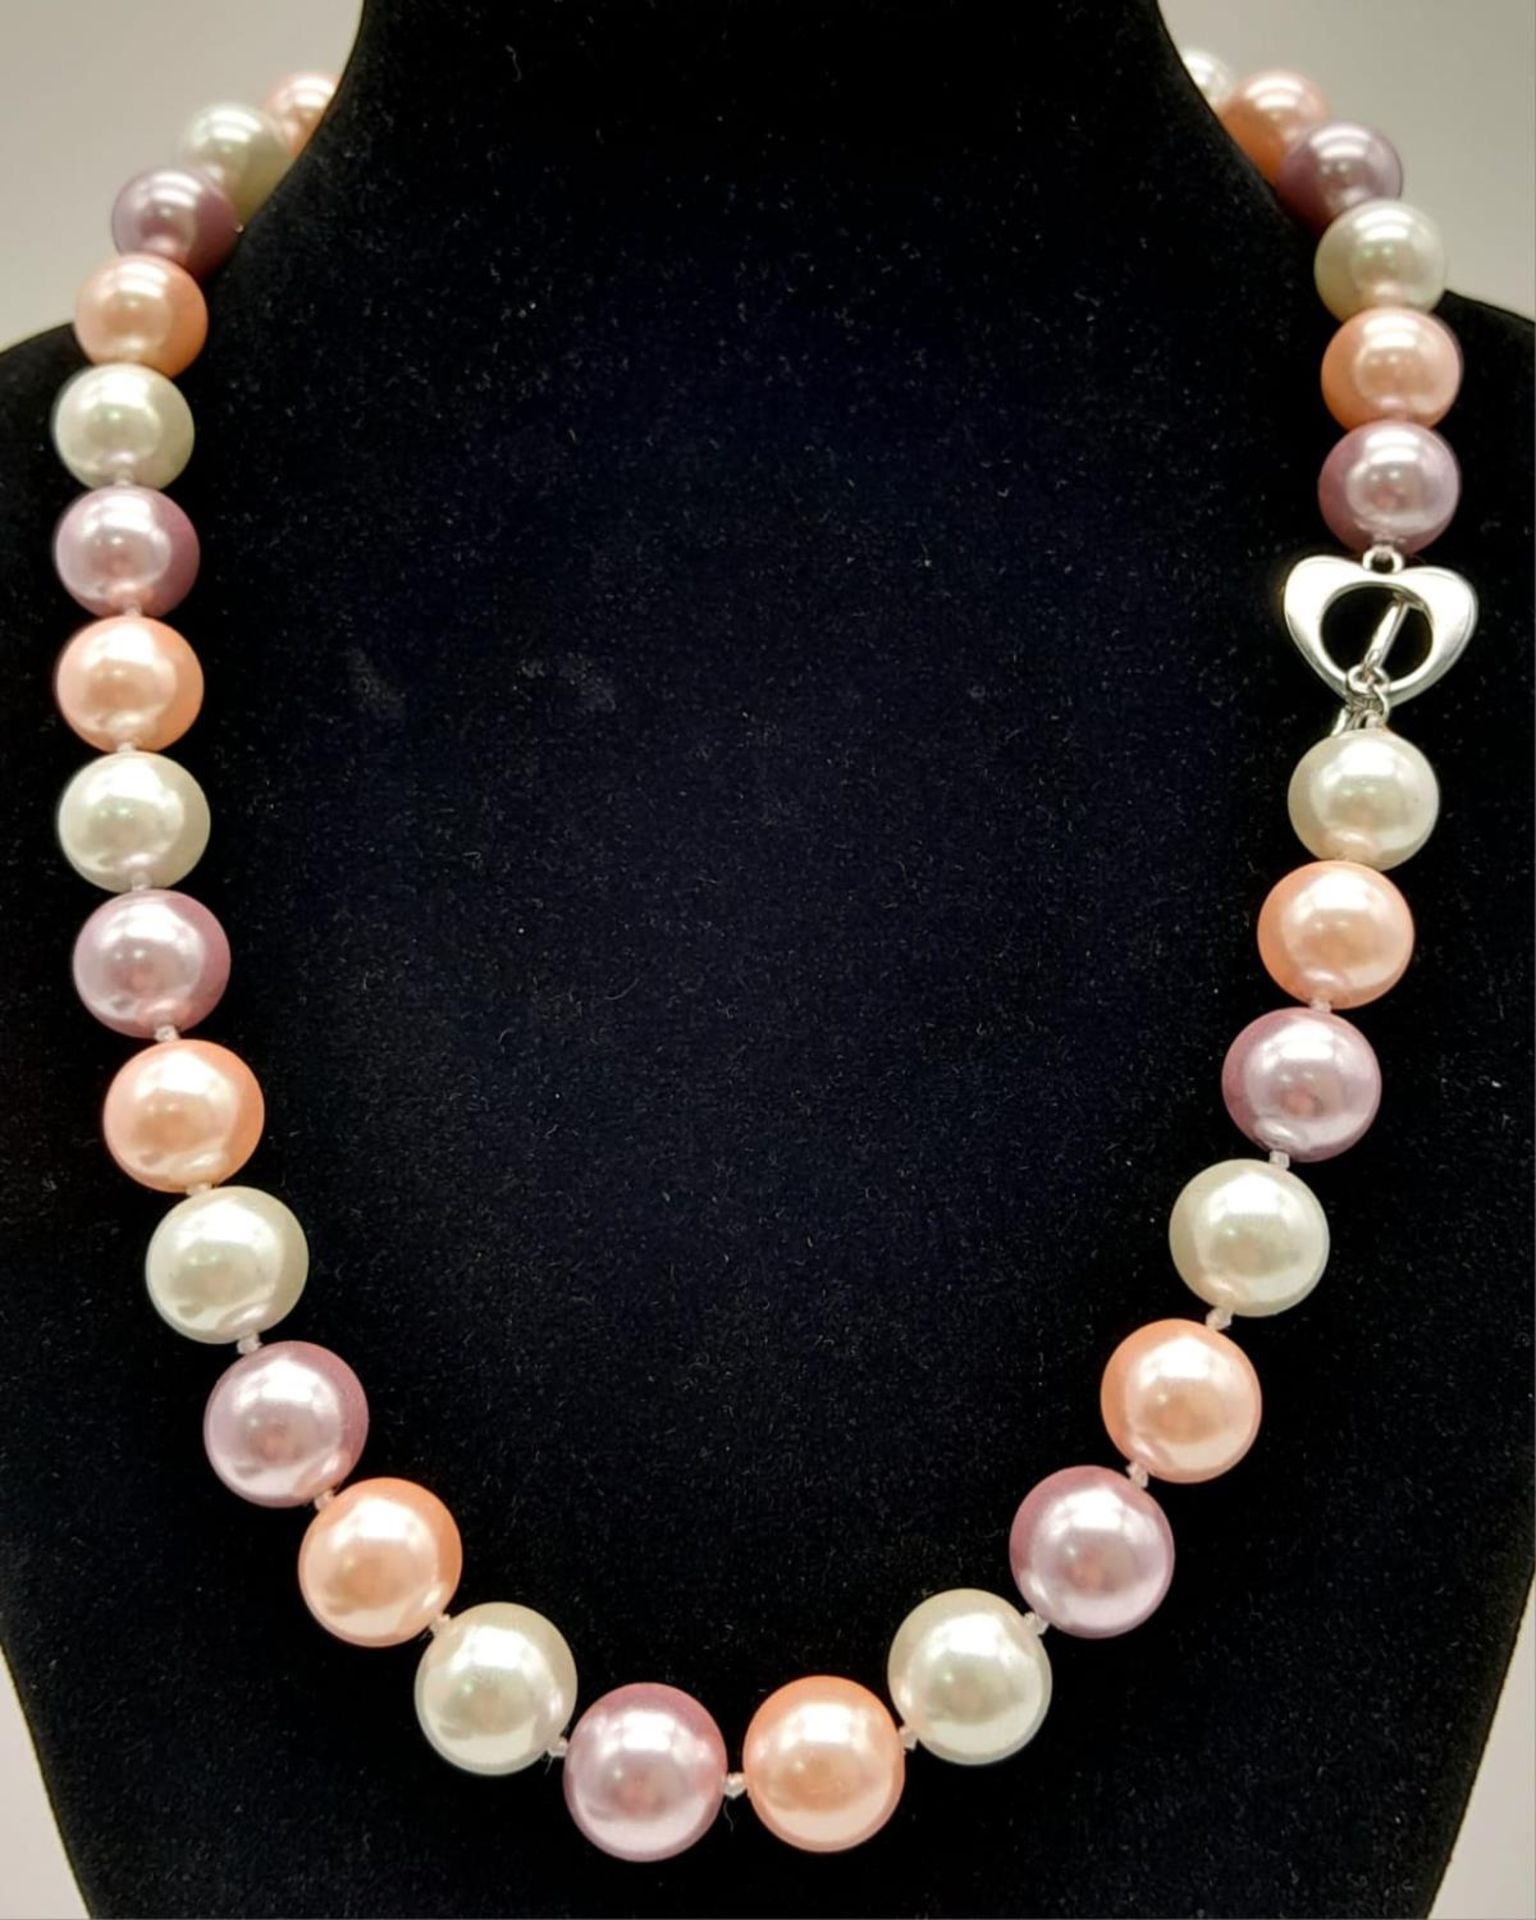 A South Sea Pearl Shell Pastel Coloured Bead Necklace. 12mm beads. 44cm necklace length.